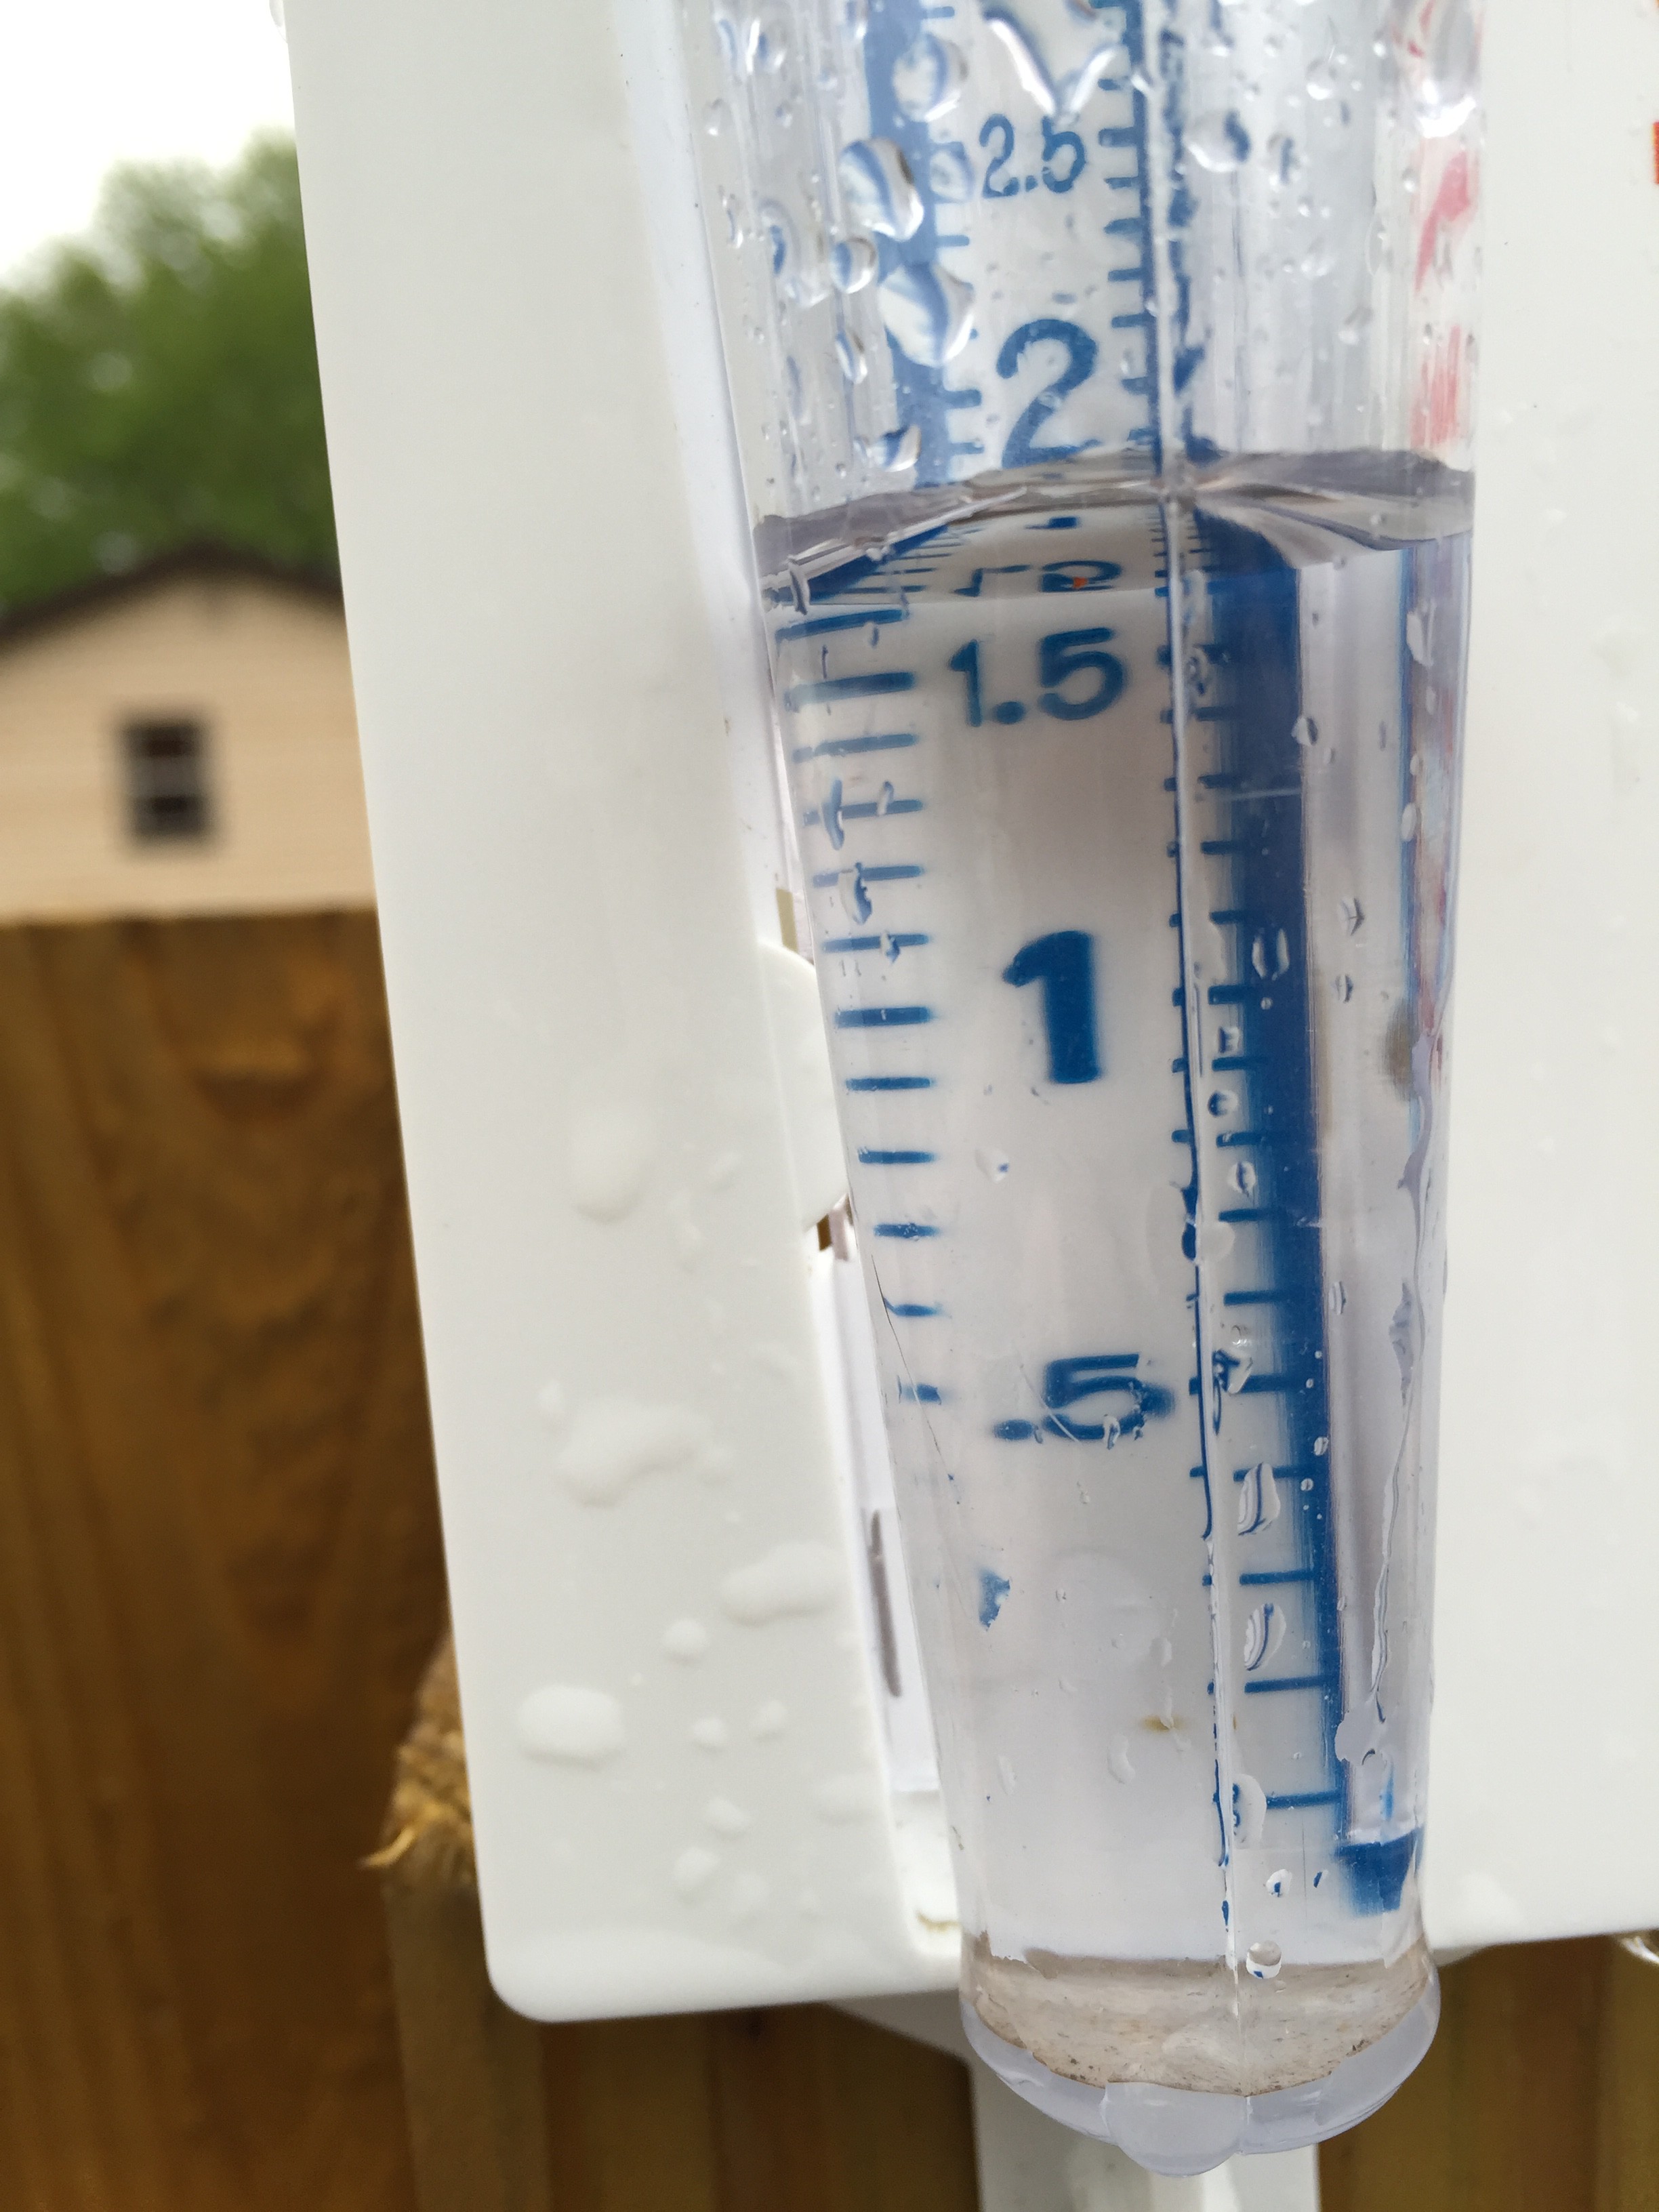 Rainfall amount in Fremont on April 25